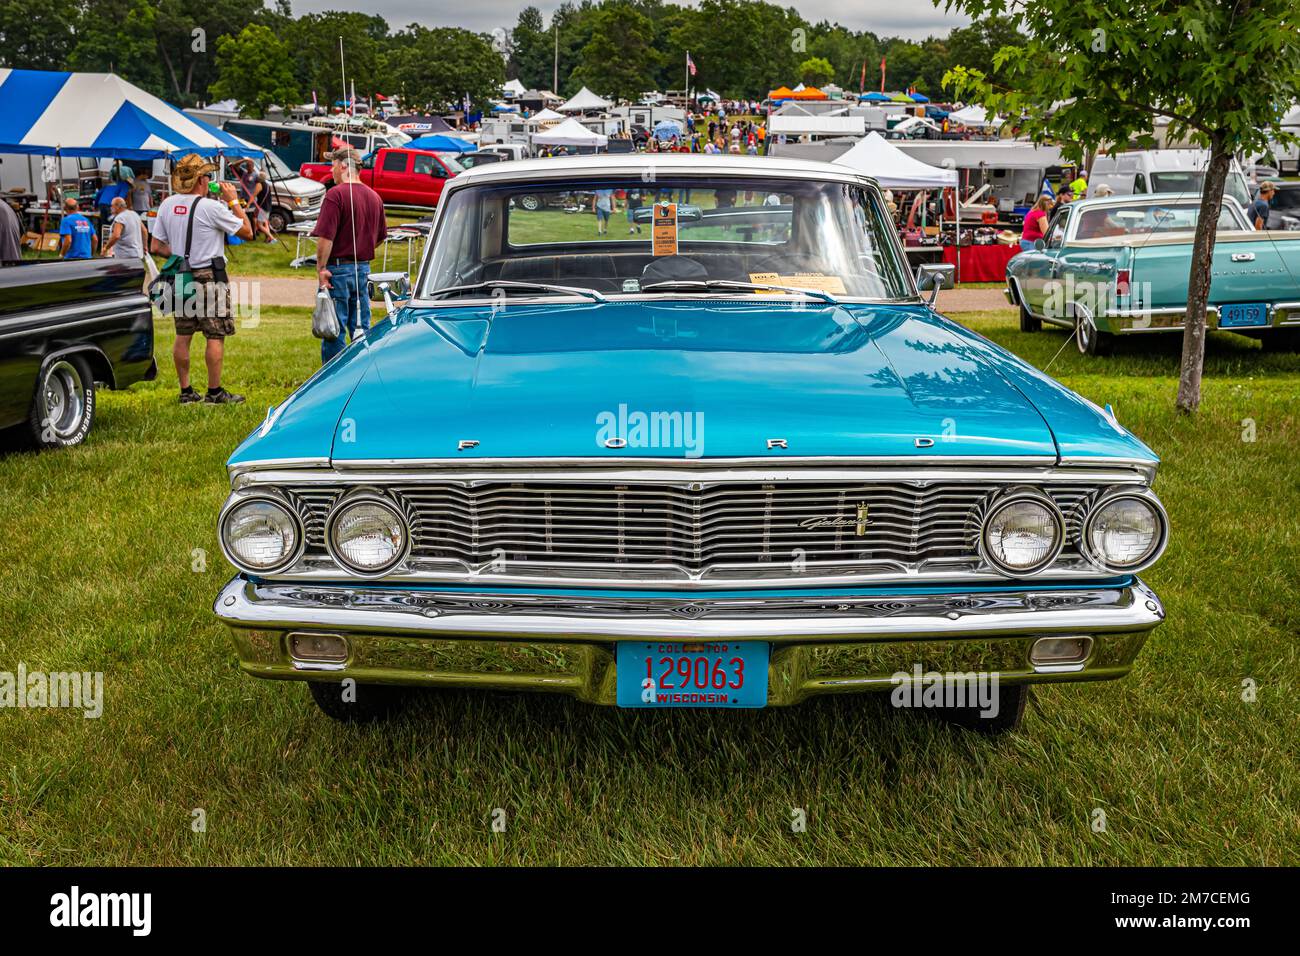 Iola, WI - July 07, 2022: High perspective front view of a 1964 Ford Galaxie 500 2 Door Hardtop at a local car show. Stock Photo